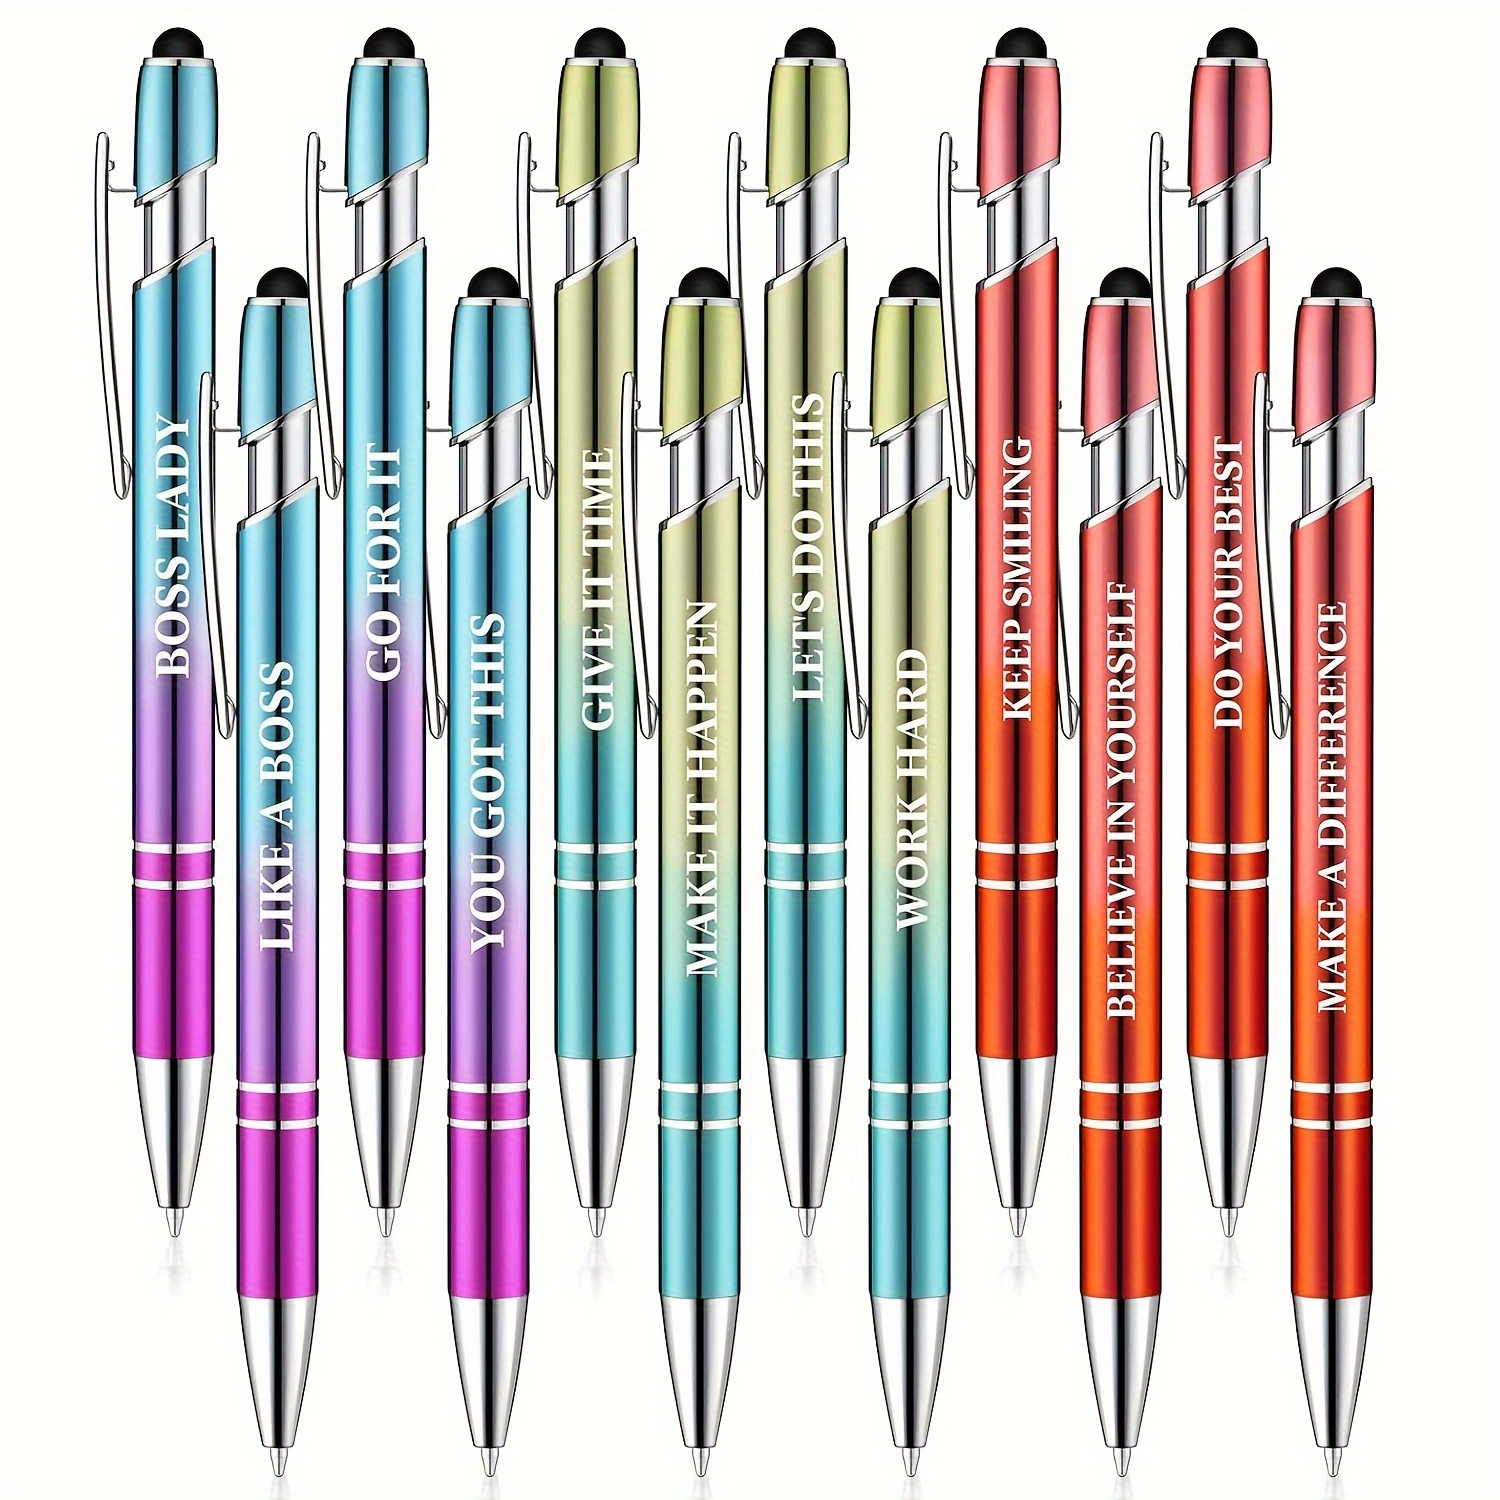 

12-pack Motivational Metal Ballpoint Pens With Stylus Tip, Quick-drying Medium Point, Retractable Stick Pens For Office, Inspirational Gifts For Women And Coworkers (ages 14+)